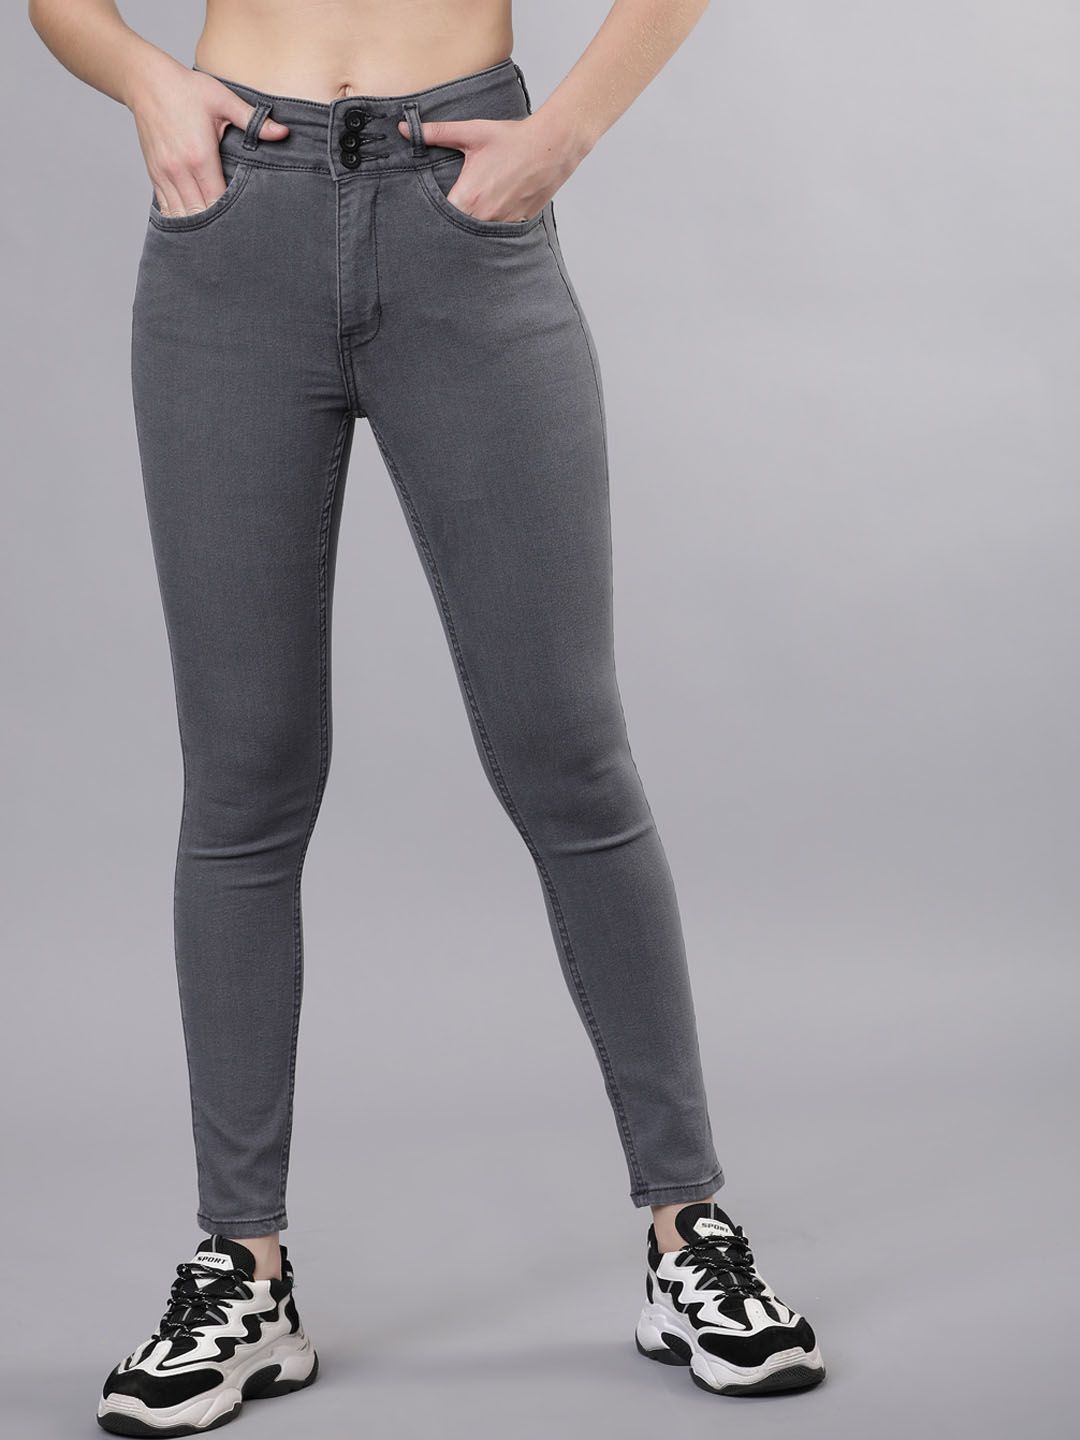 Tokyo Talkies Women Grey Super Skinny Fit Mid-Rise Clean Look Stretchable Jeans Price in India